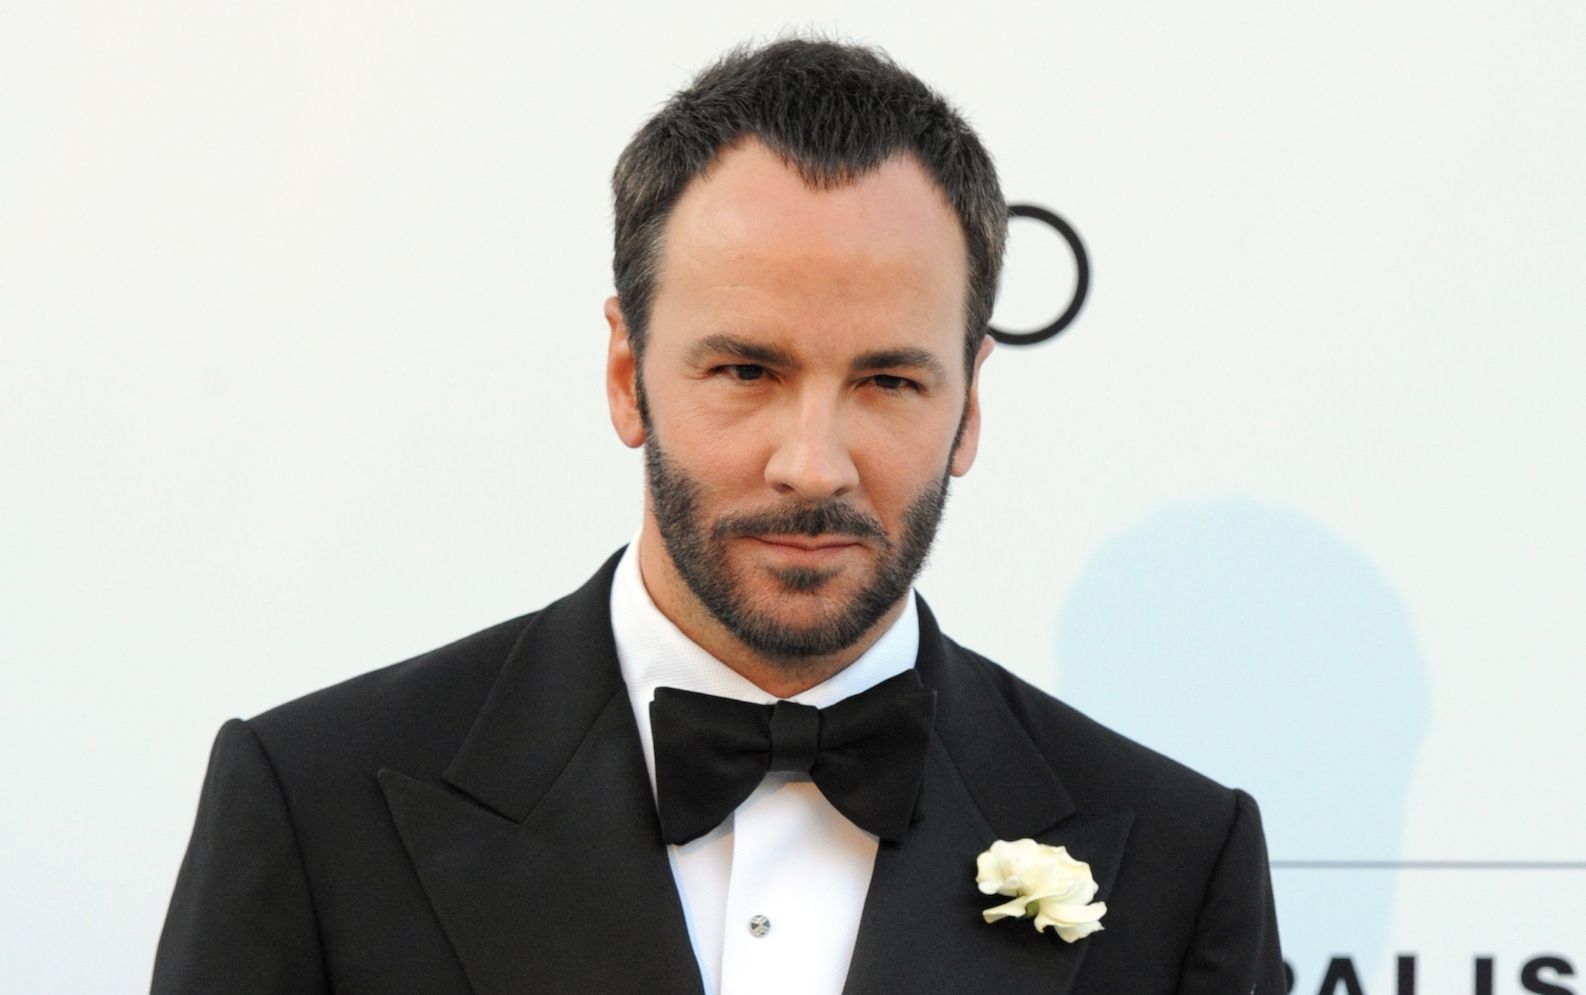 Tom Ford is launching a new skincare line, Tom Ford Research